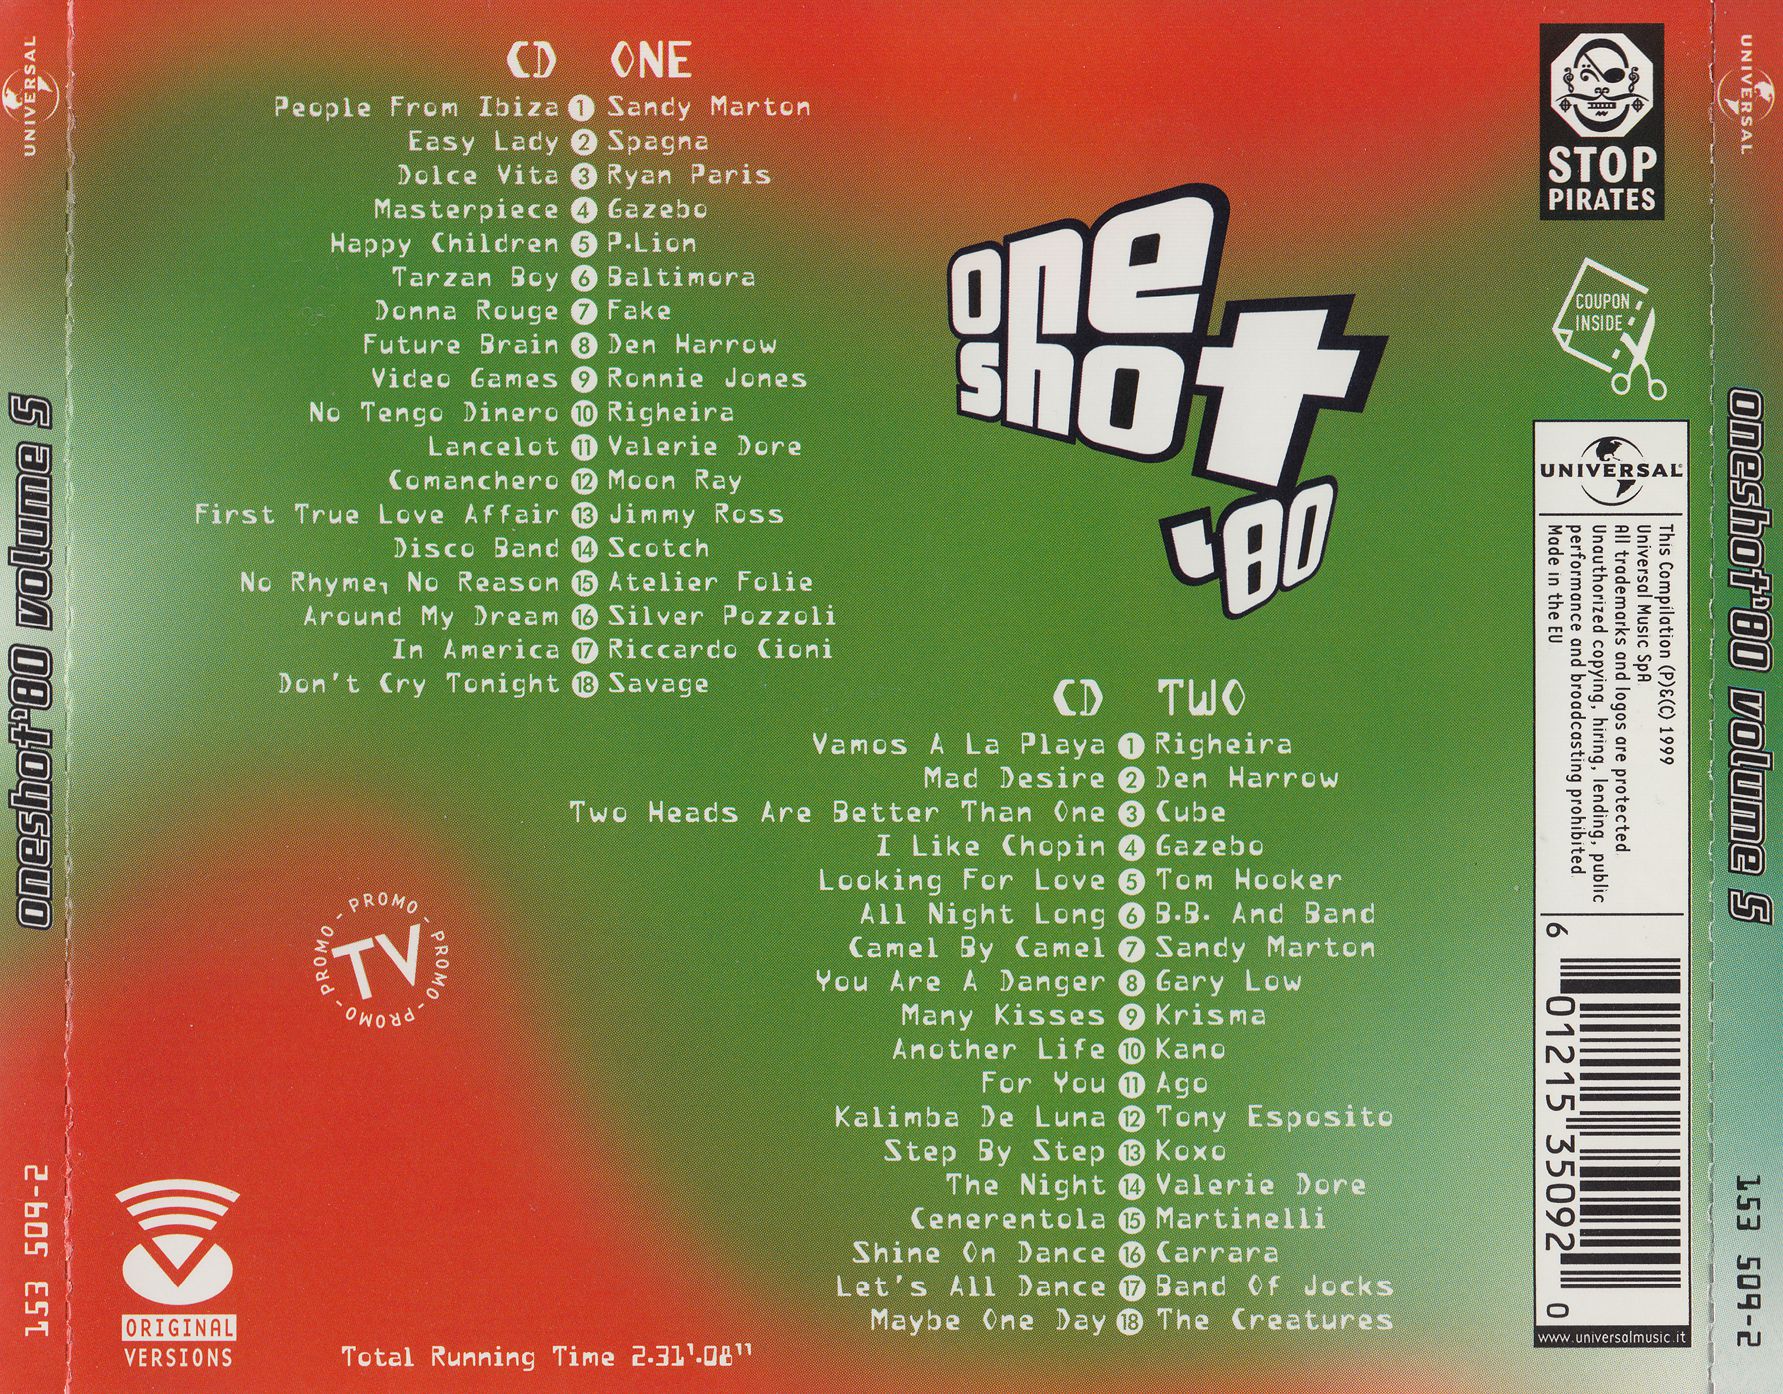 Release “One Shot '80, Volume 5: Dance Italia” by Various Artists